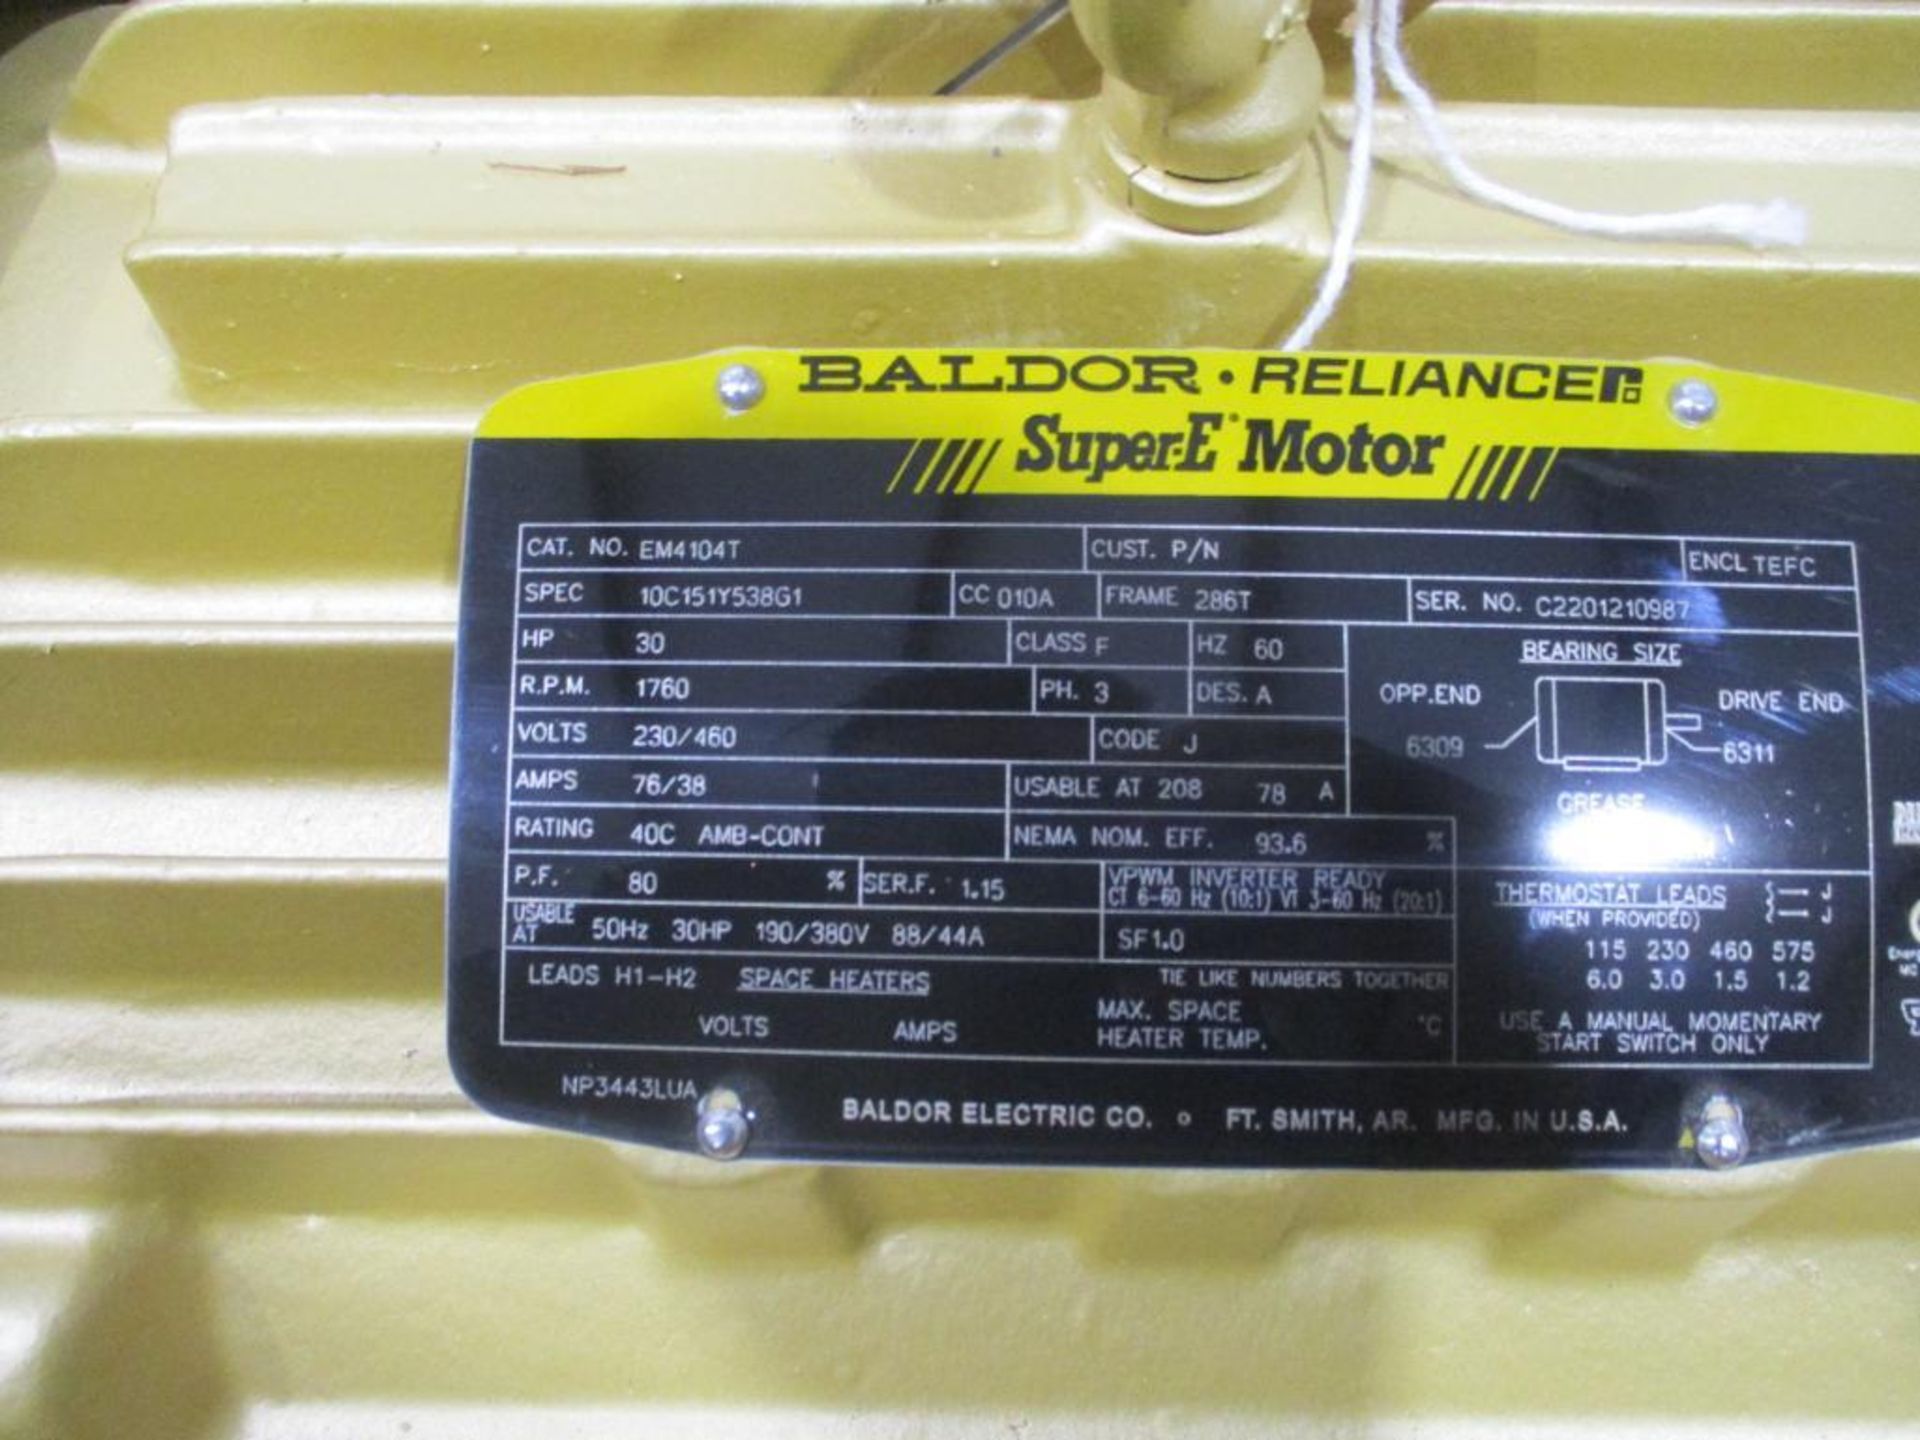 BALDOR 3 PHASE 30HP 1760RPM 286T FRAME A/C MOTOR P/N EM4104T, 425# lbs (There will be a $40 Rigging/ - Image 5 of 5